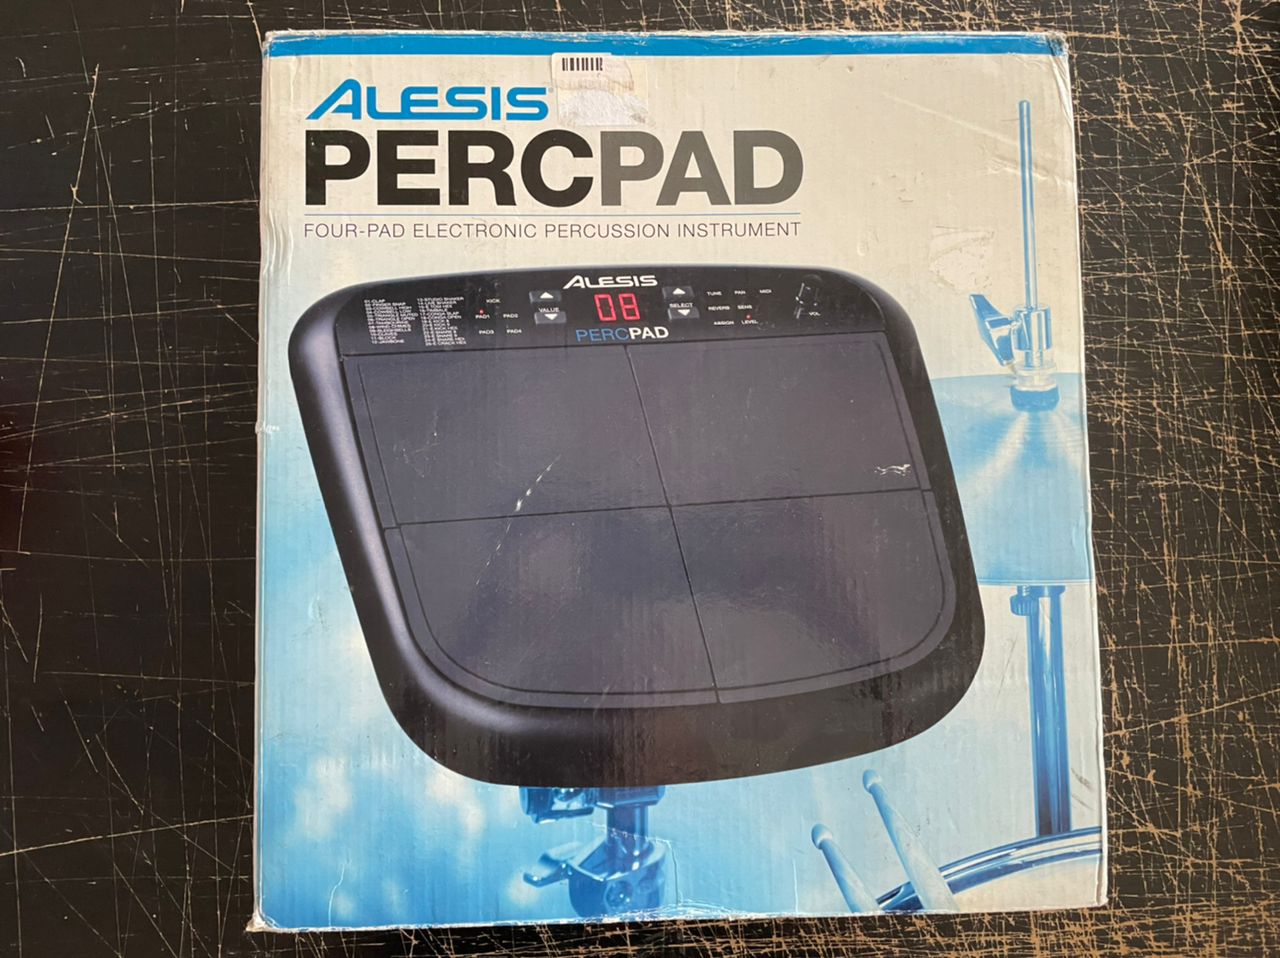 DISPLAY CLEARANCE ALESIS PERCPAD COMPACT, FOUR-PAD ELECTRONIC DRUM & PERCUSSION KIT | ALESIS , Zoso Music